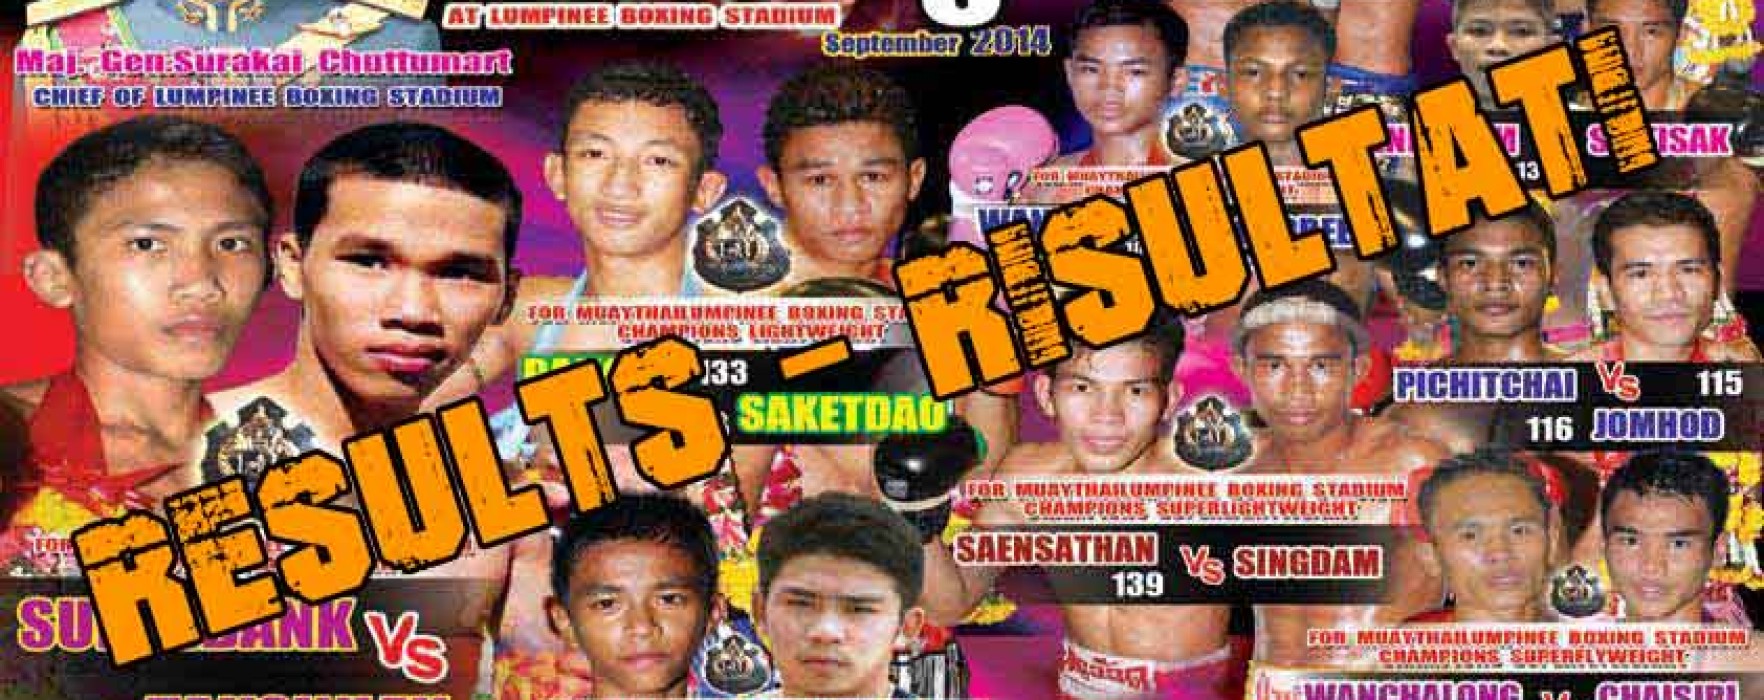 Live Results: Lumpinee Superfights 5th September 2014